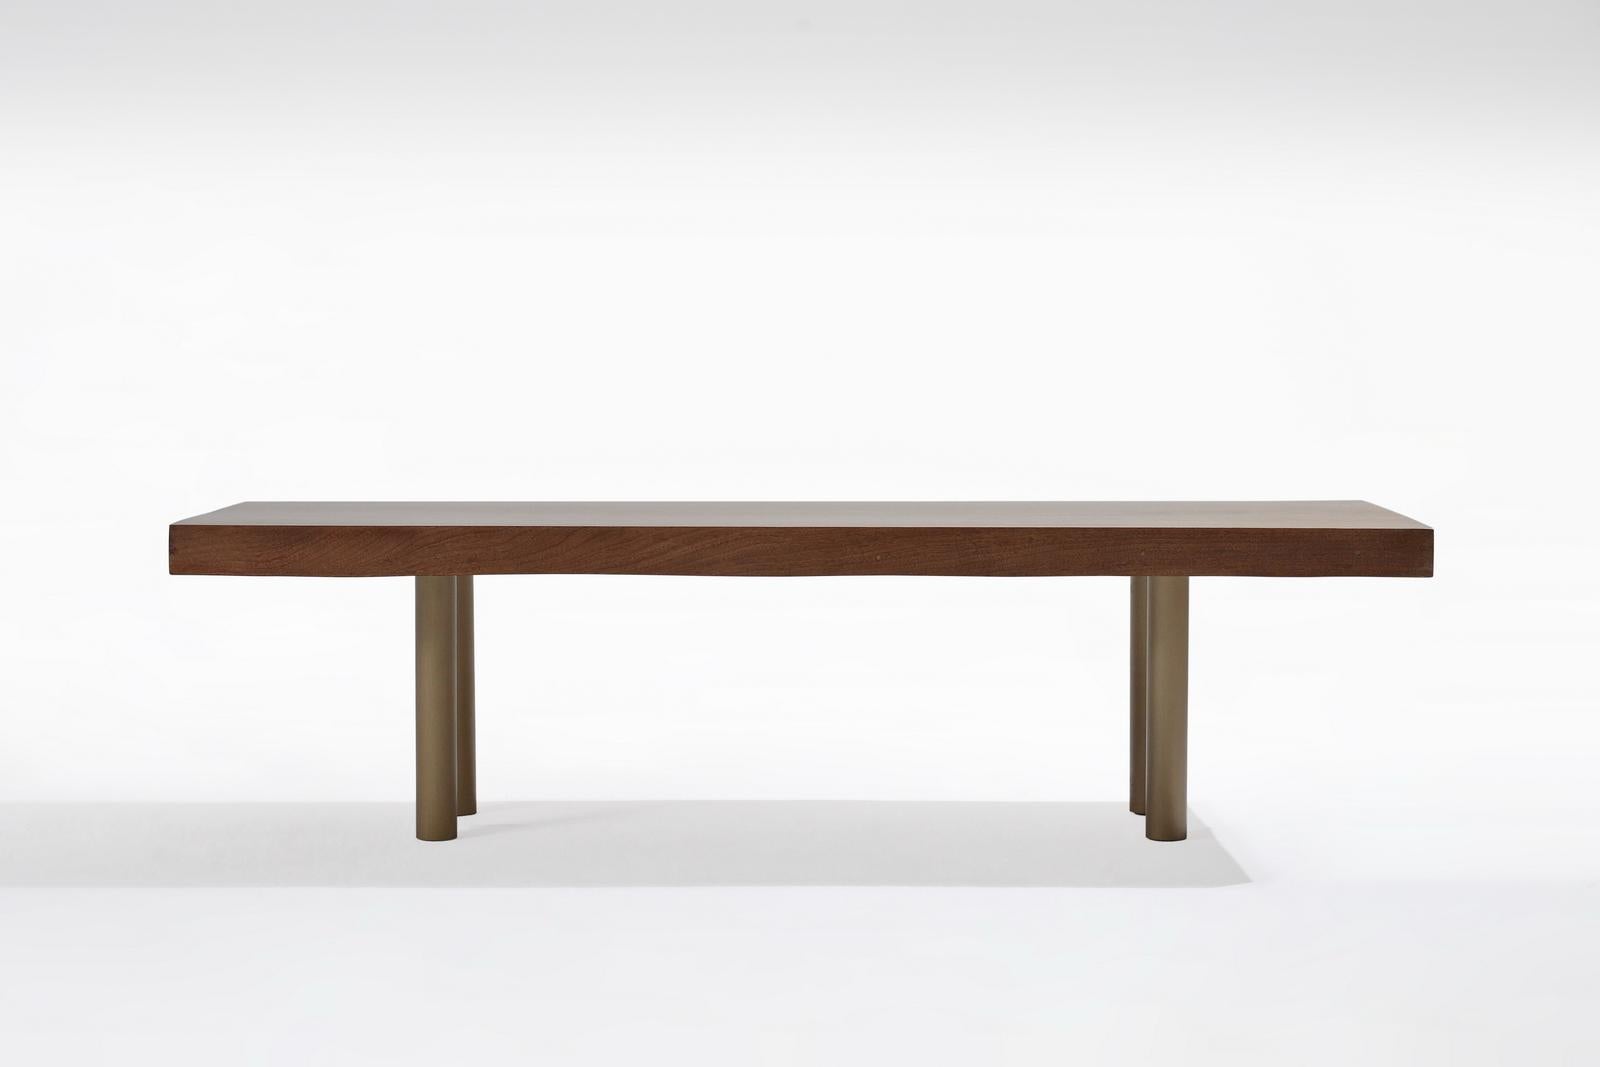 This low table was crafted from a single slab of antique Chicken-Wing wood (鸡翅木 Jīchì mù – read more on this wood below). This cherished wood variety was prized and collected since 14th century China for its grain which mimics the natural world of